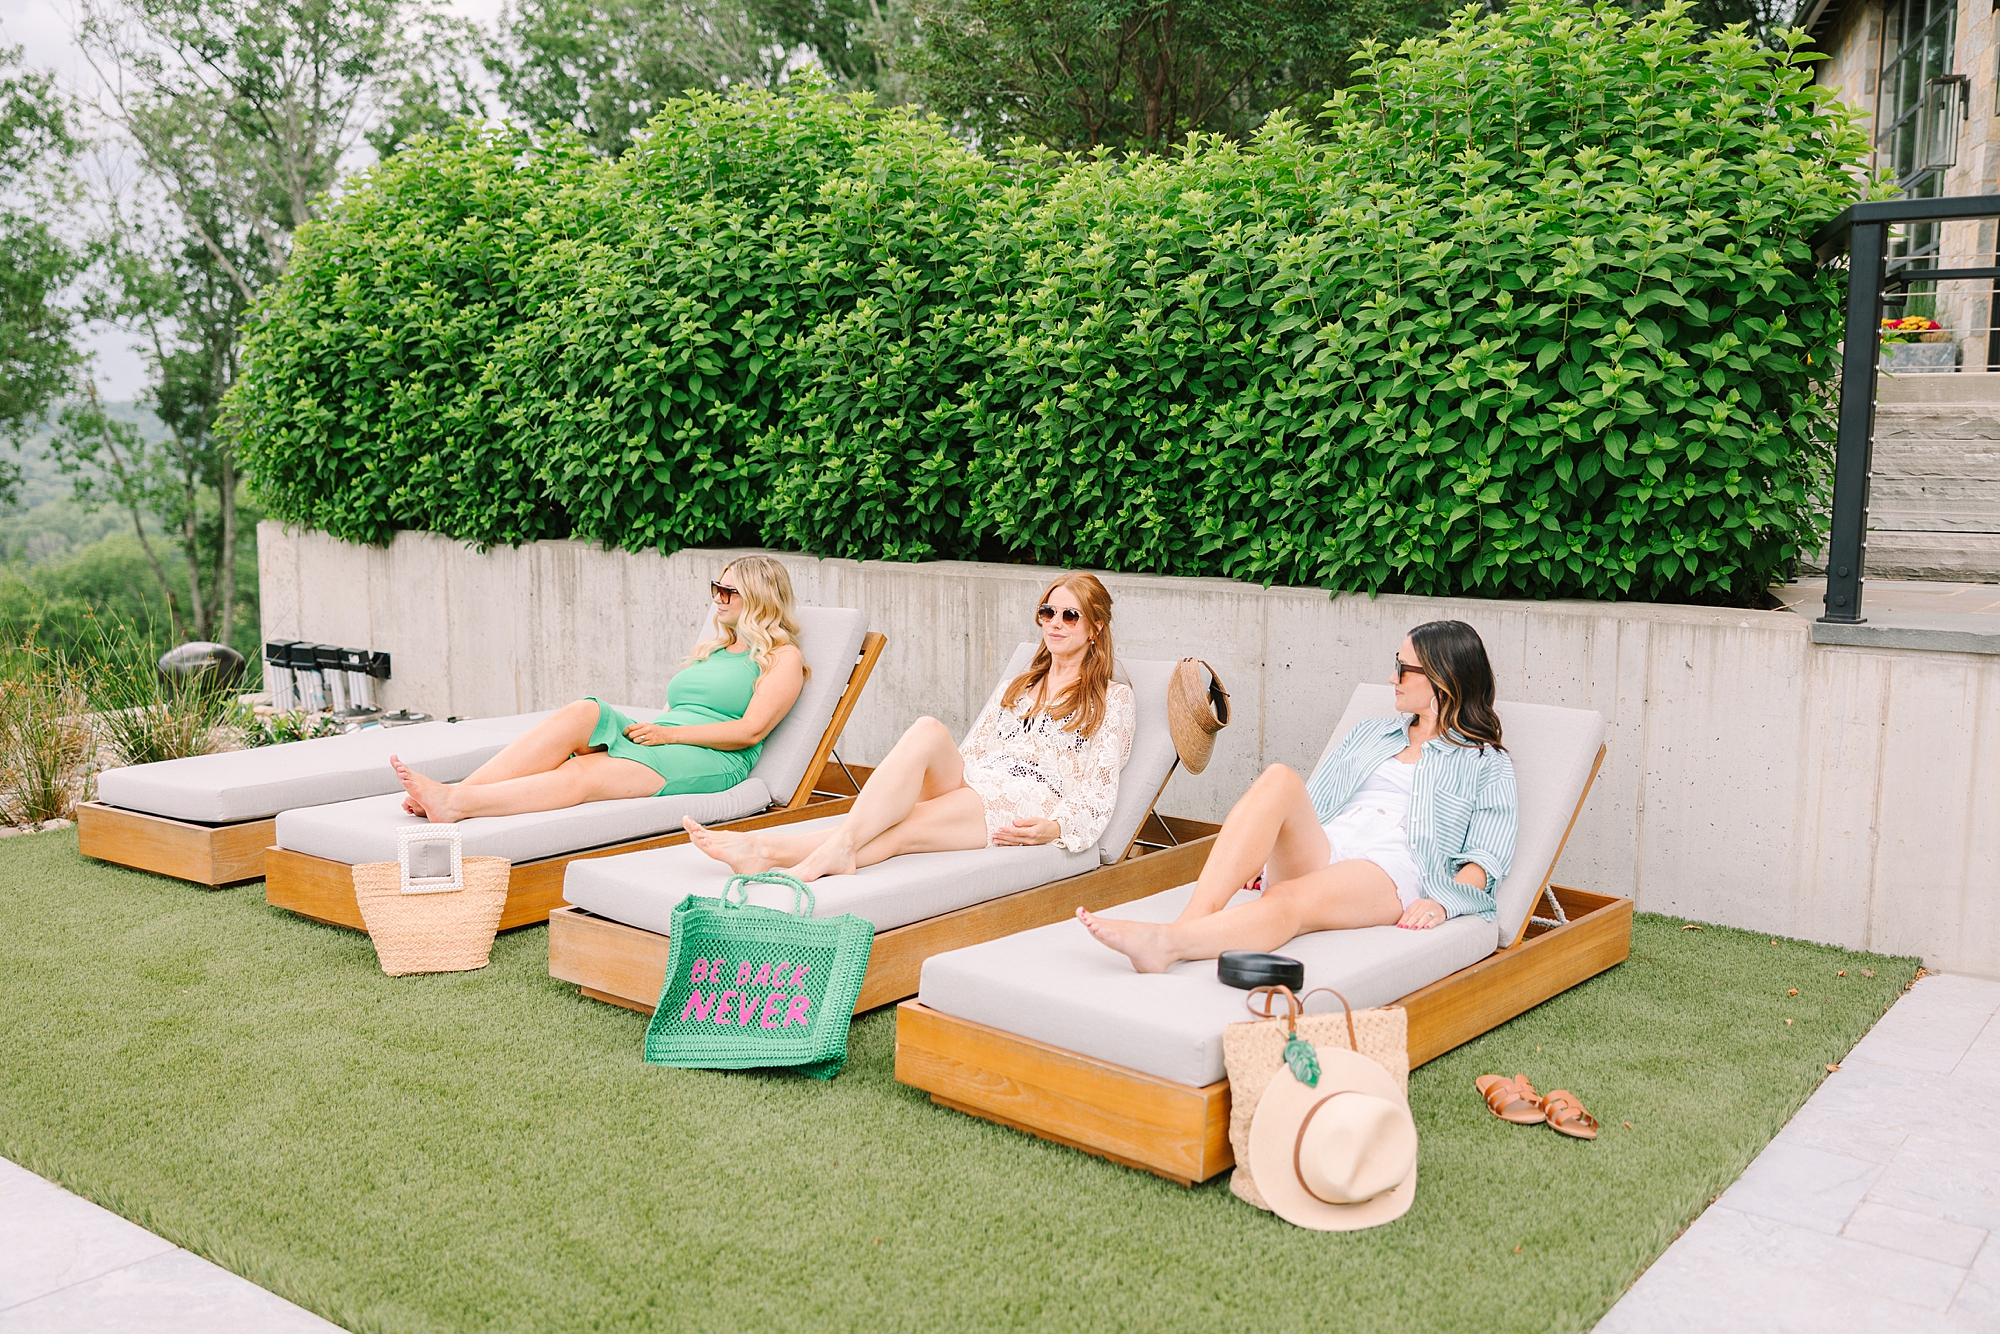 team reclines one loungers by pool talking during Nolensville TN branding session